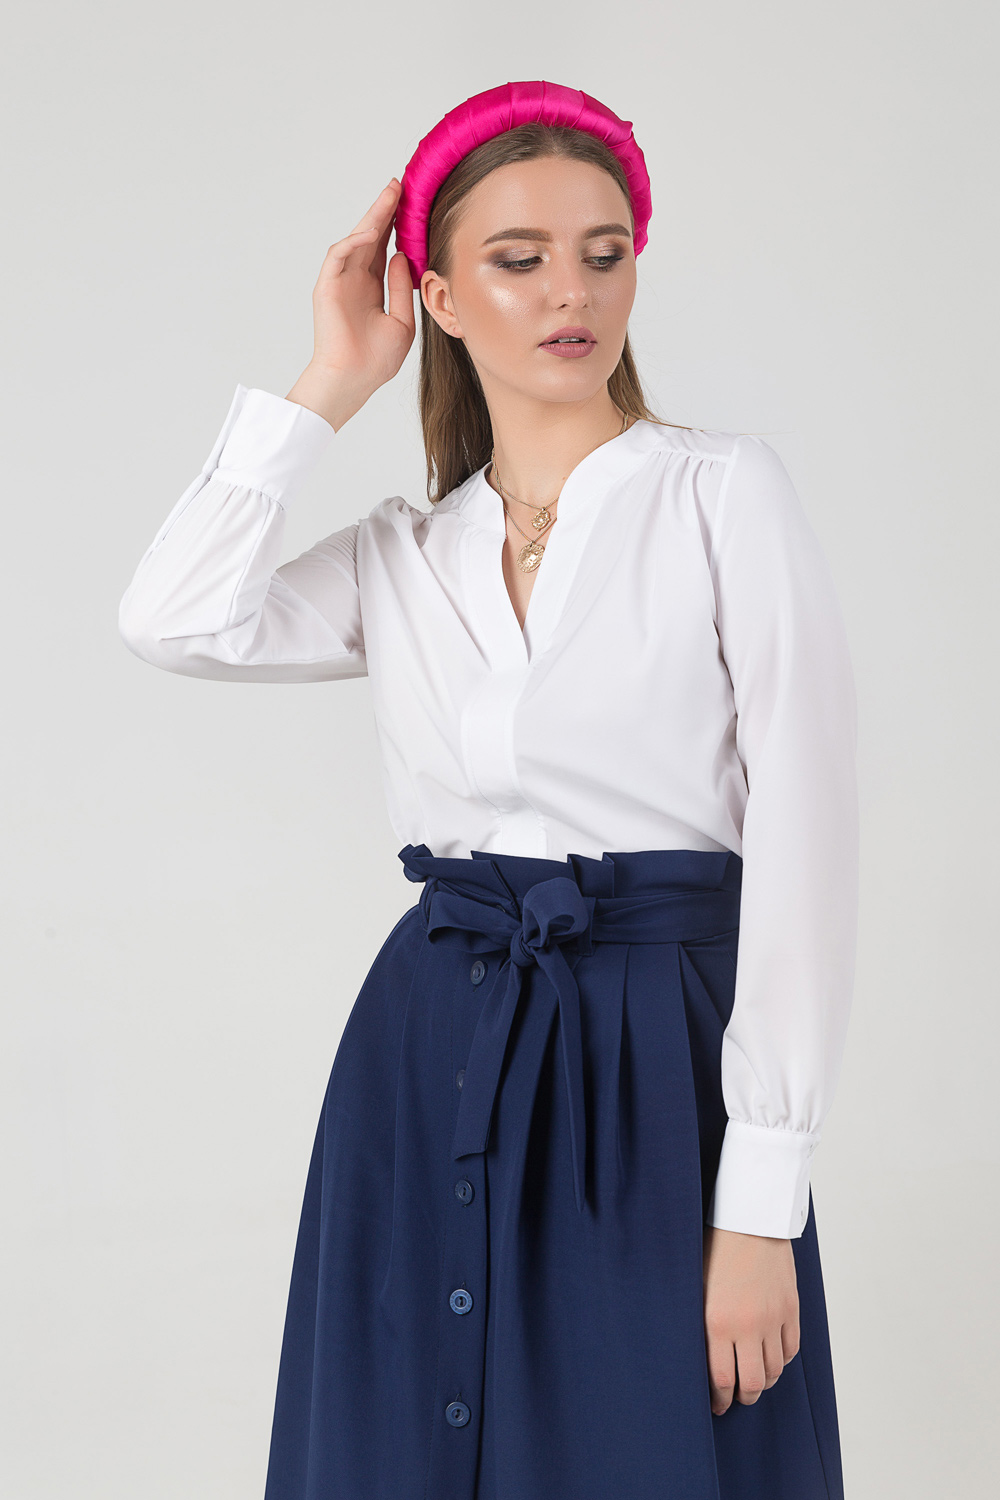 Blouse with a neckline and folds